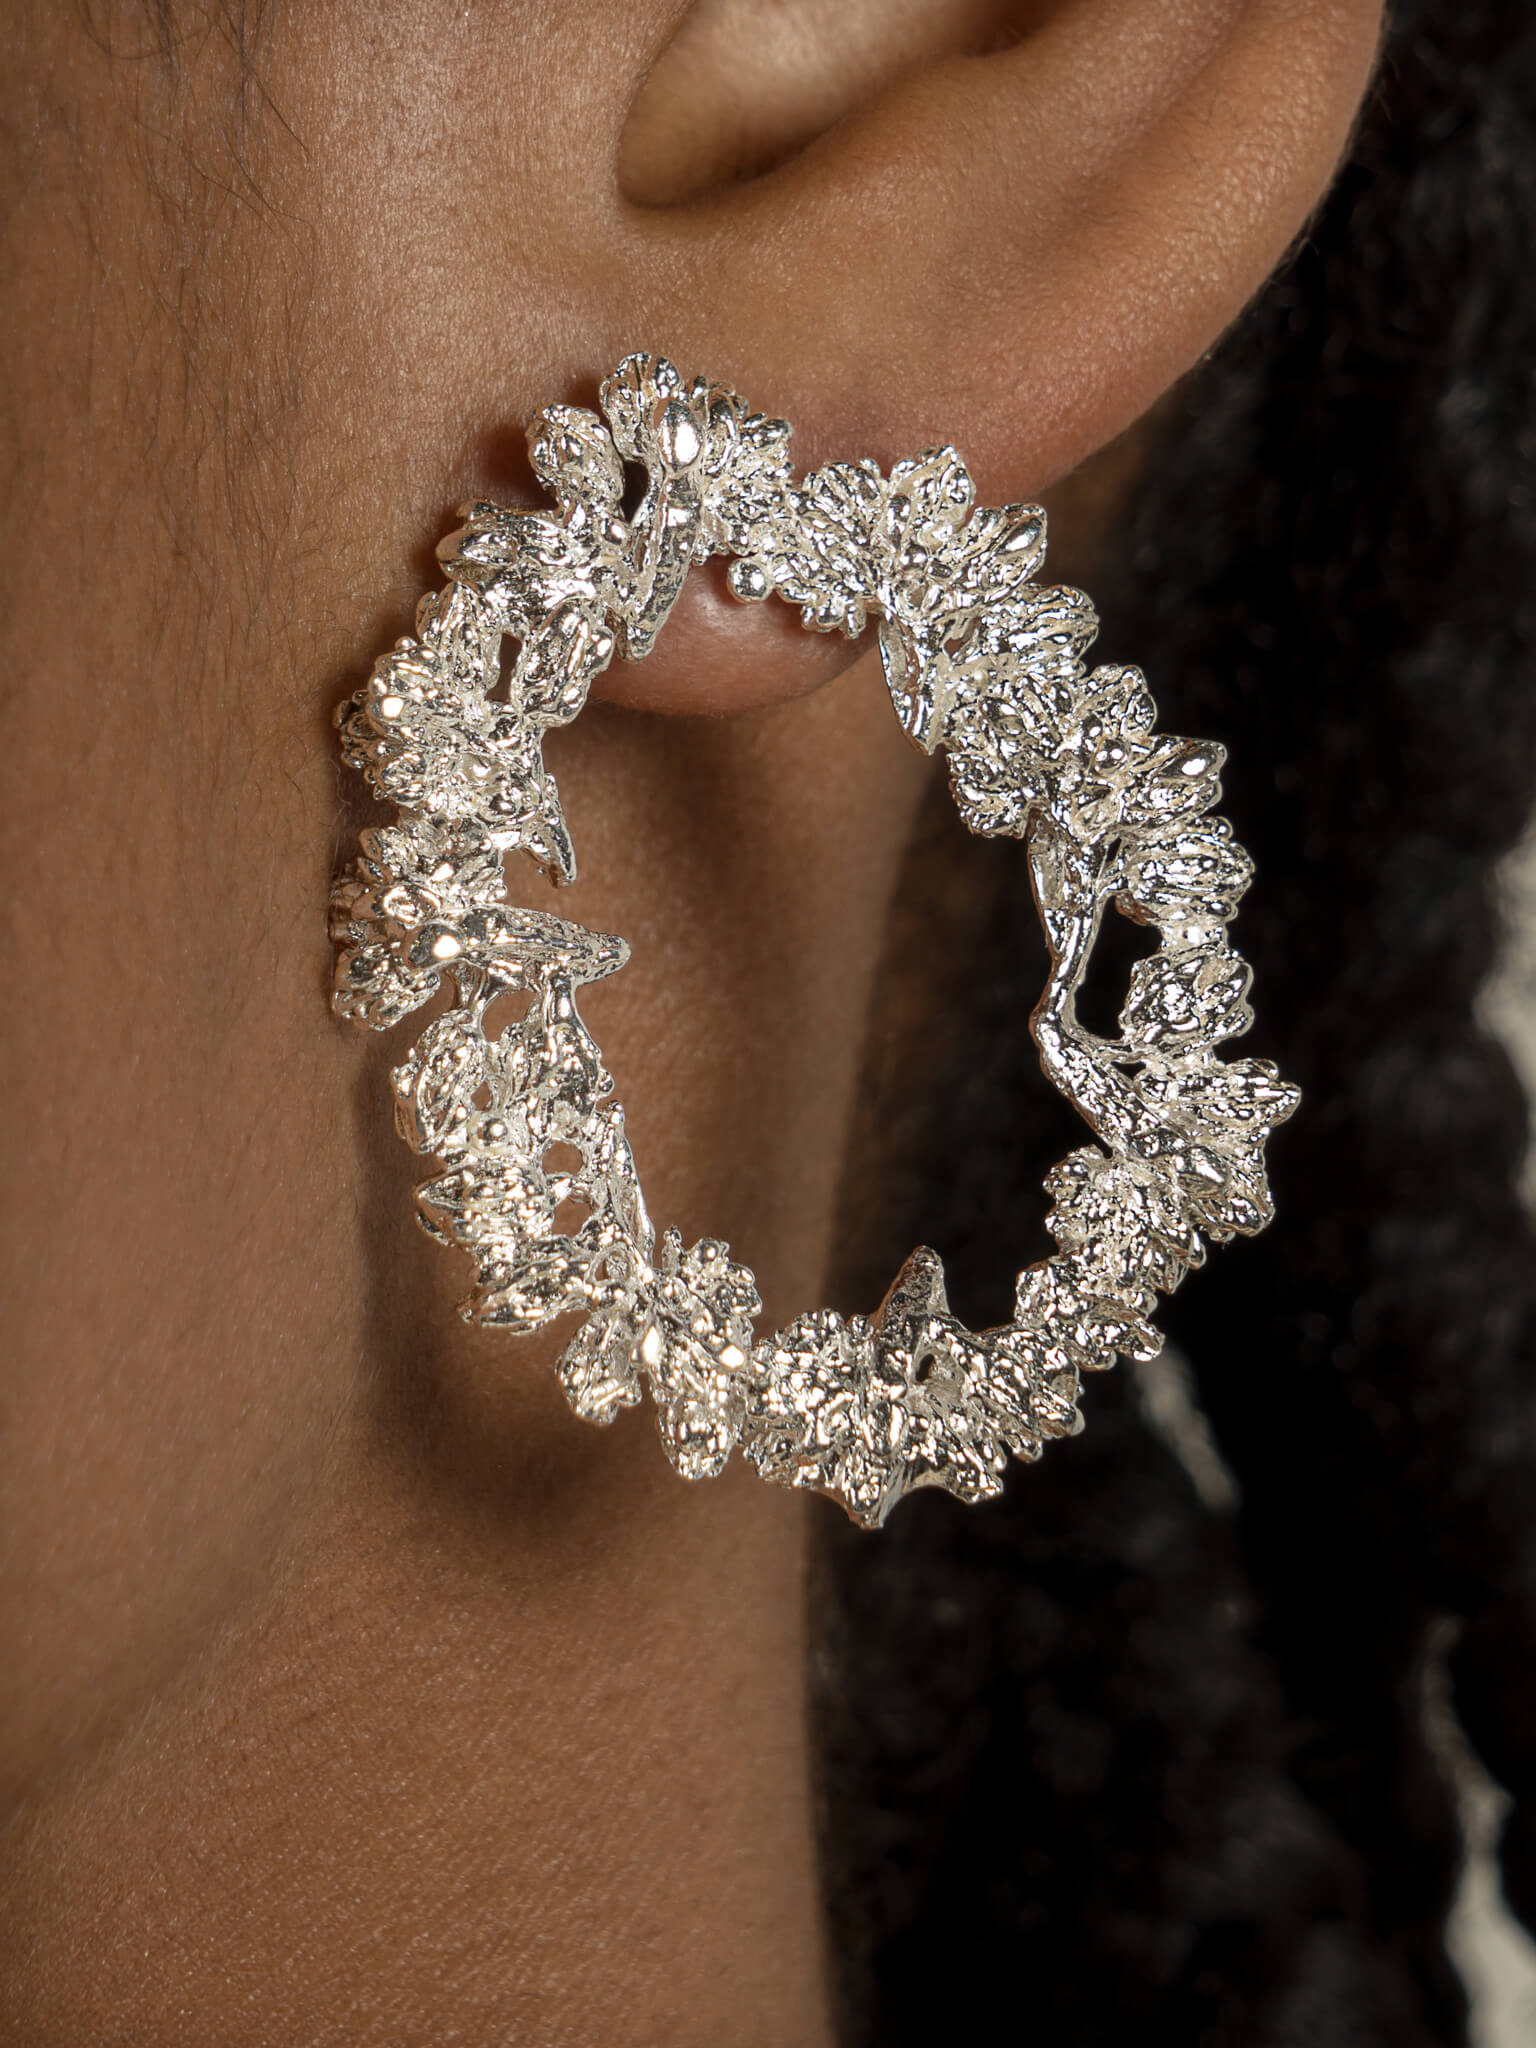 A close up of a woman's ear adorned with Cremilde Bispo Jewellery's Garden's Delight Earrings, radiating nature's beauty and refined elegance.